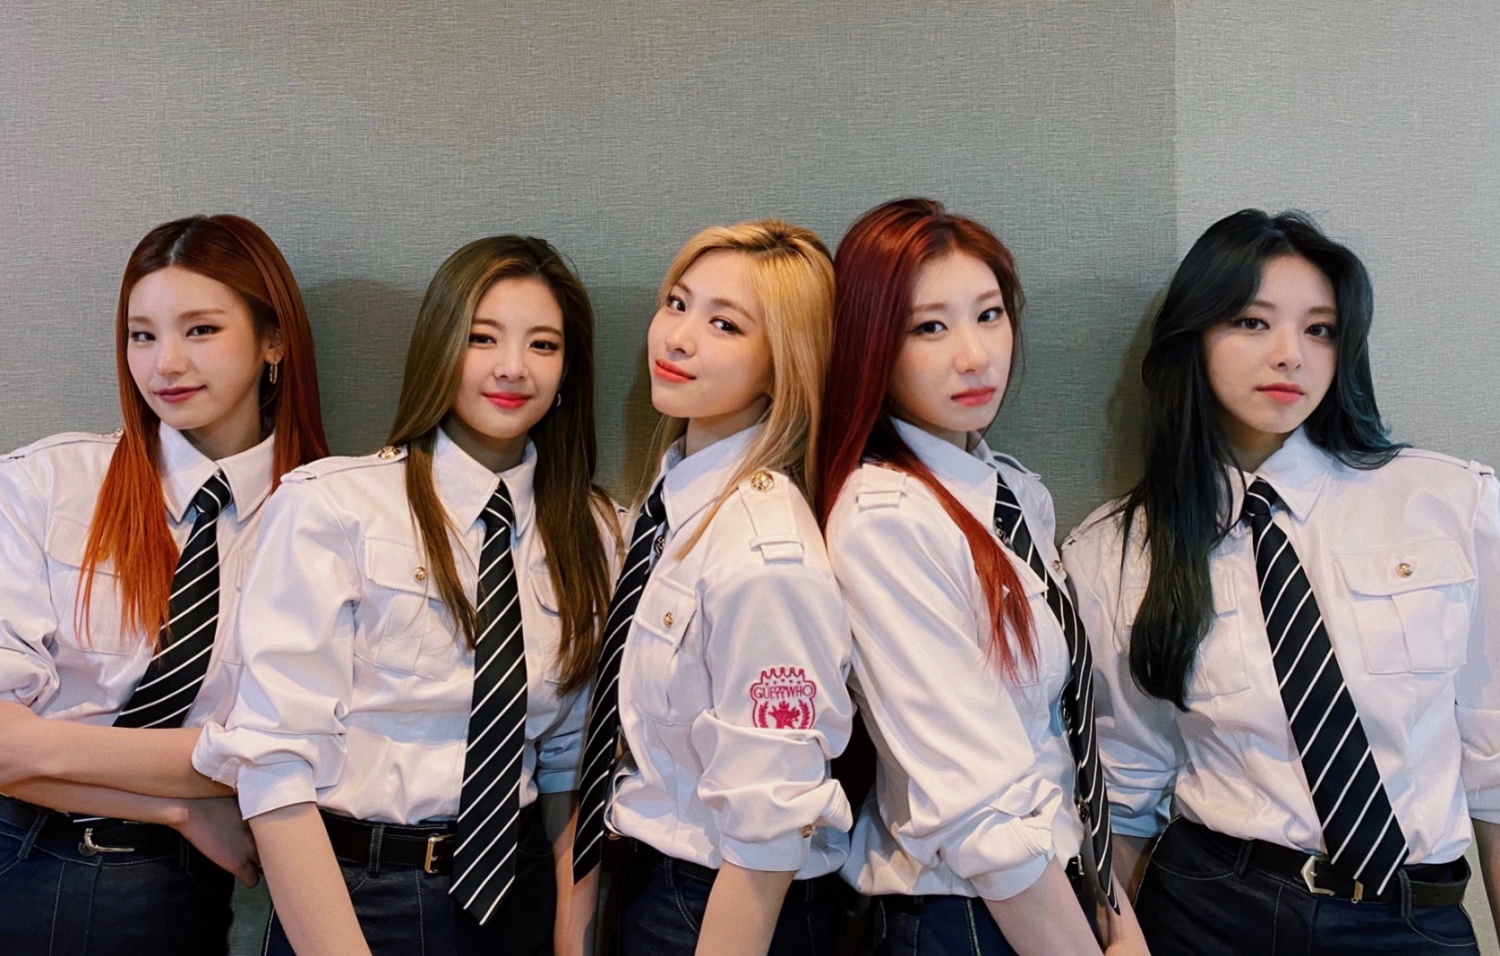 ITZY Joins BTS, BLACKPINK, and TWICE as the Only K-pop Group to Reach